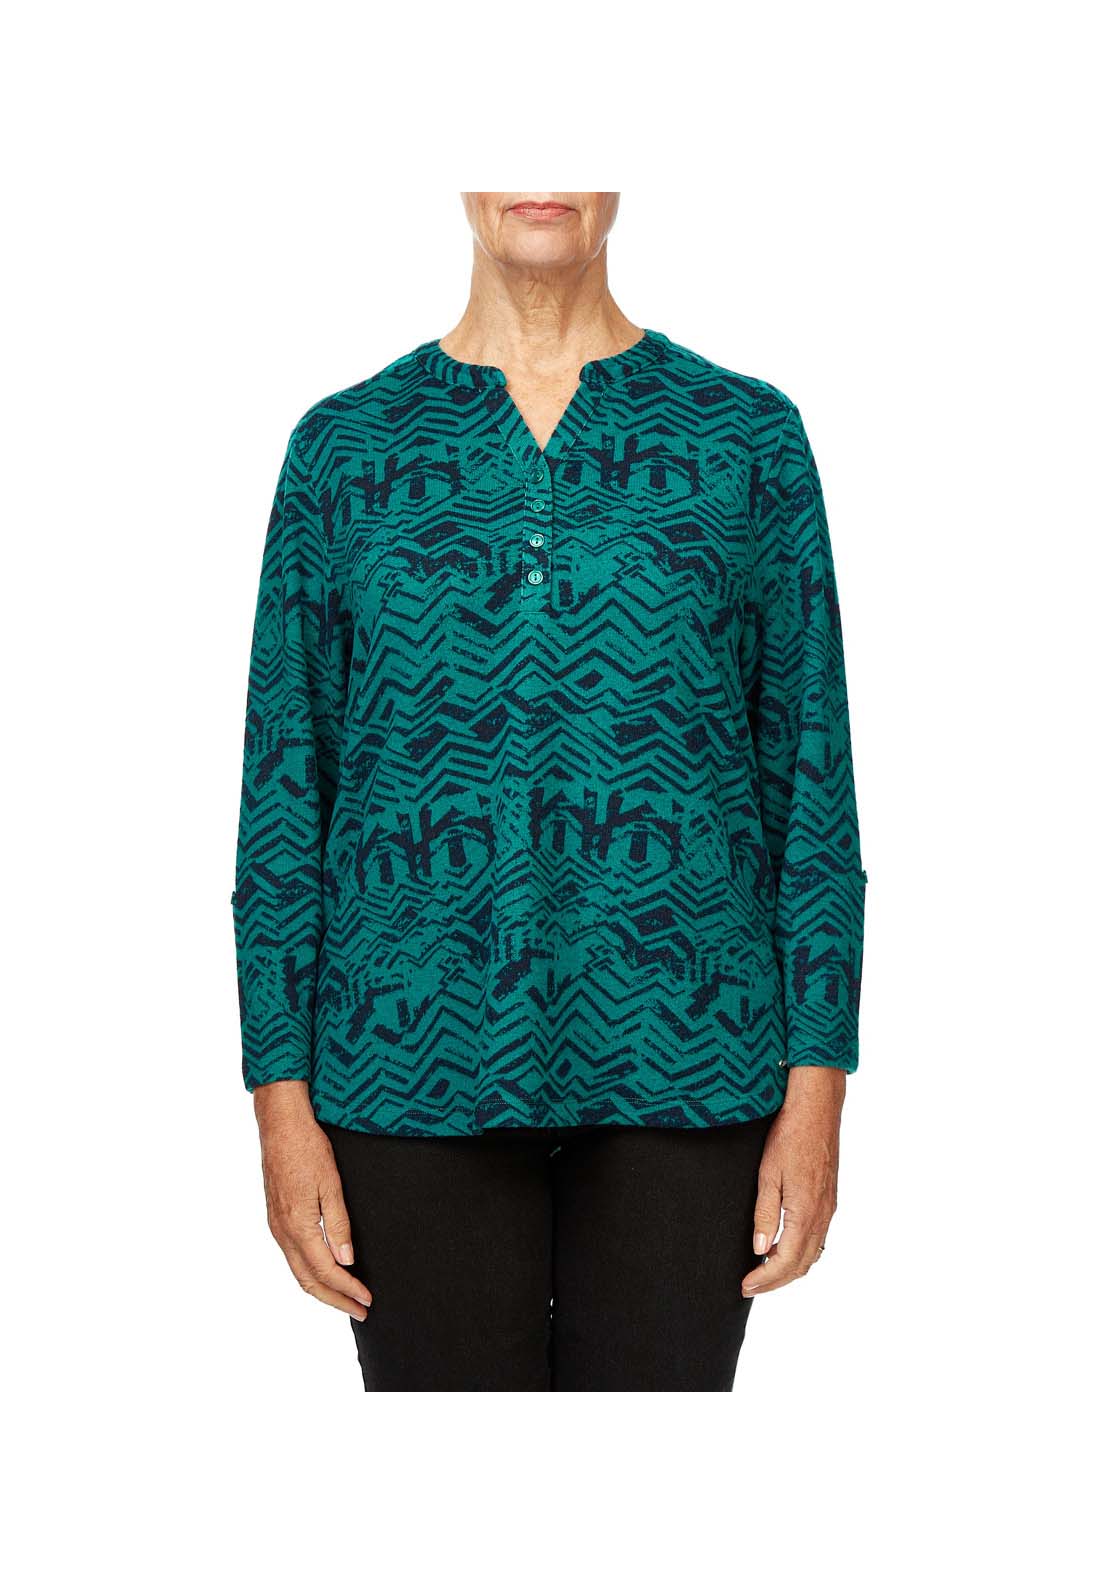 Tigiwear Azure Abstract Print Top 3 Shaws Department Stores